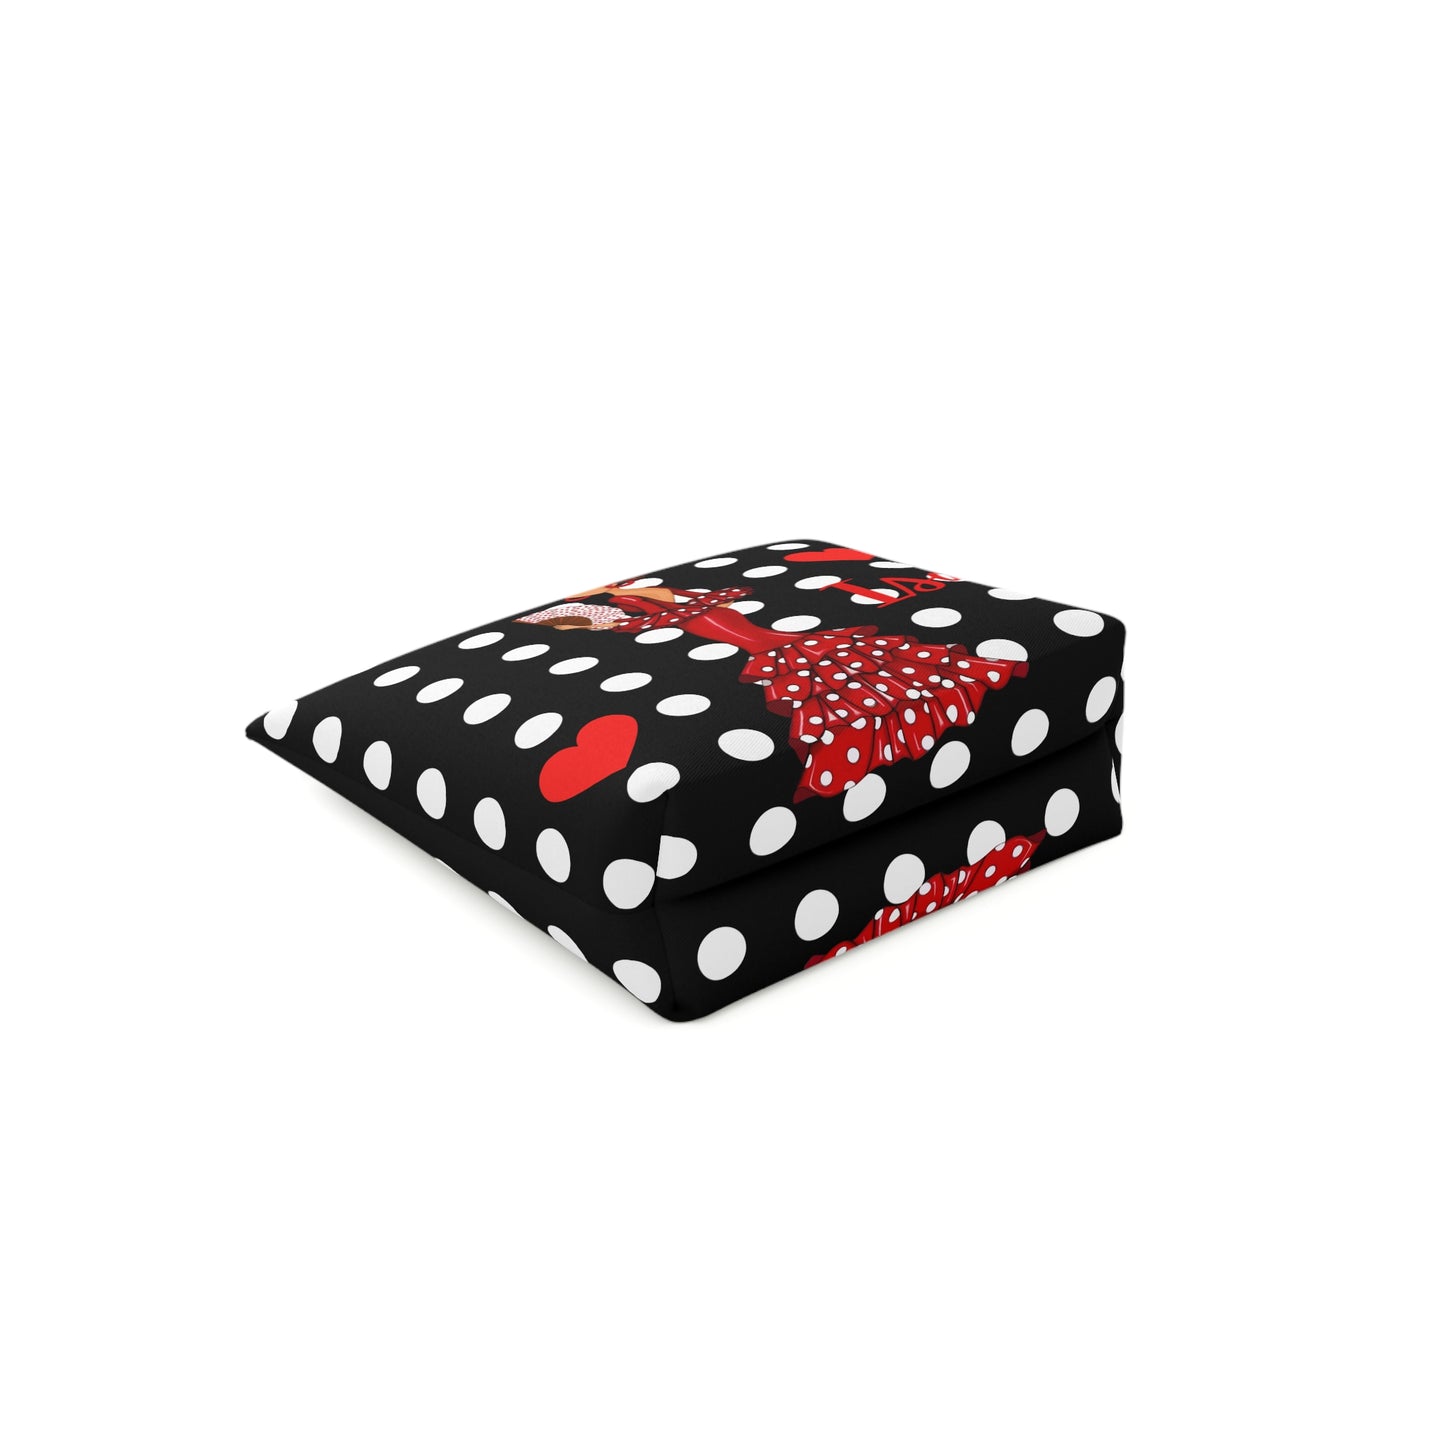 a black and white polka dot blanket with a minnie mouse on it